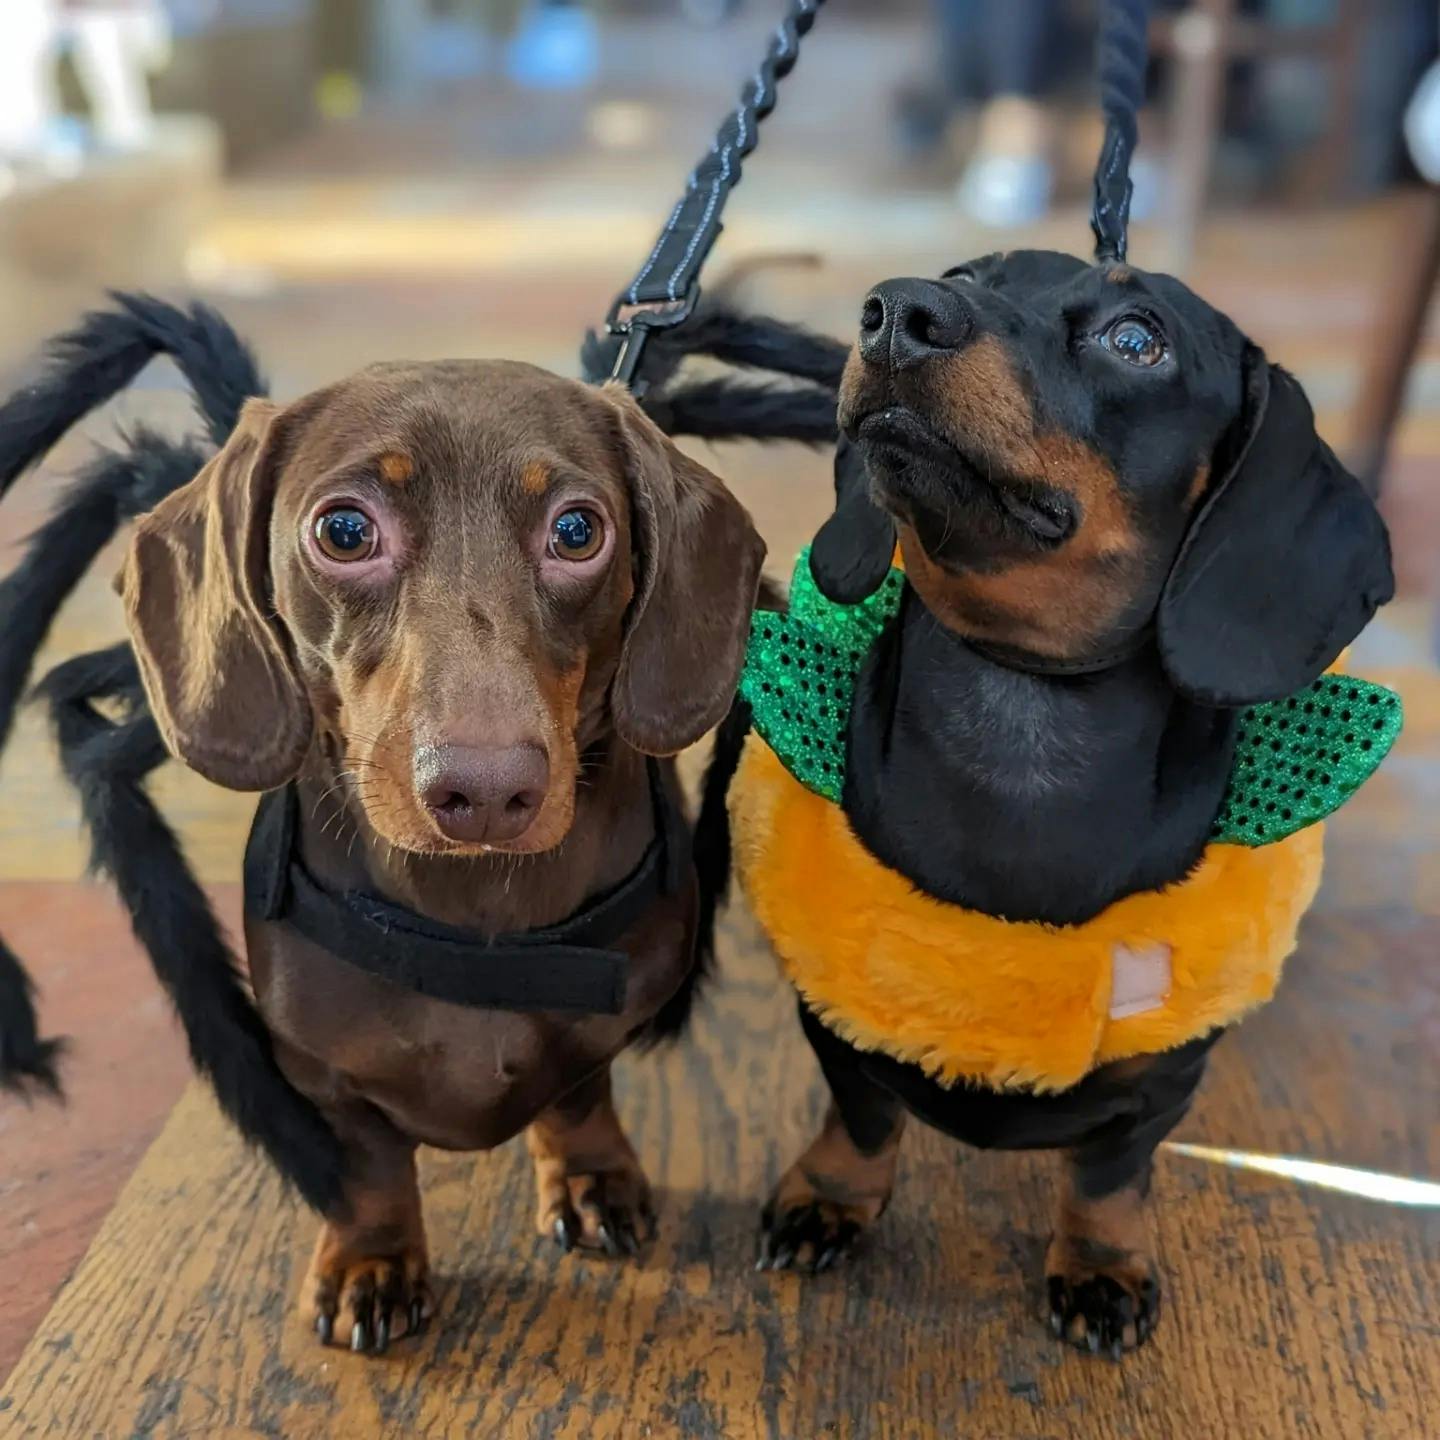 A Halloween-themed sausage dog event is coming to Bermondsey